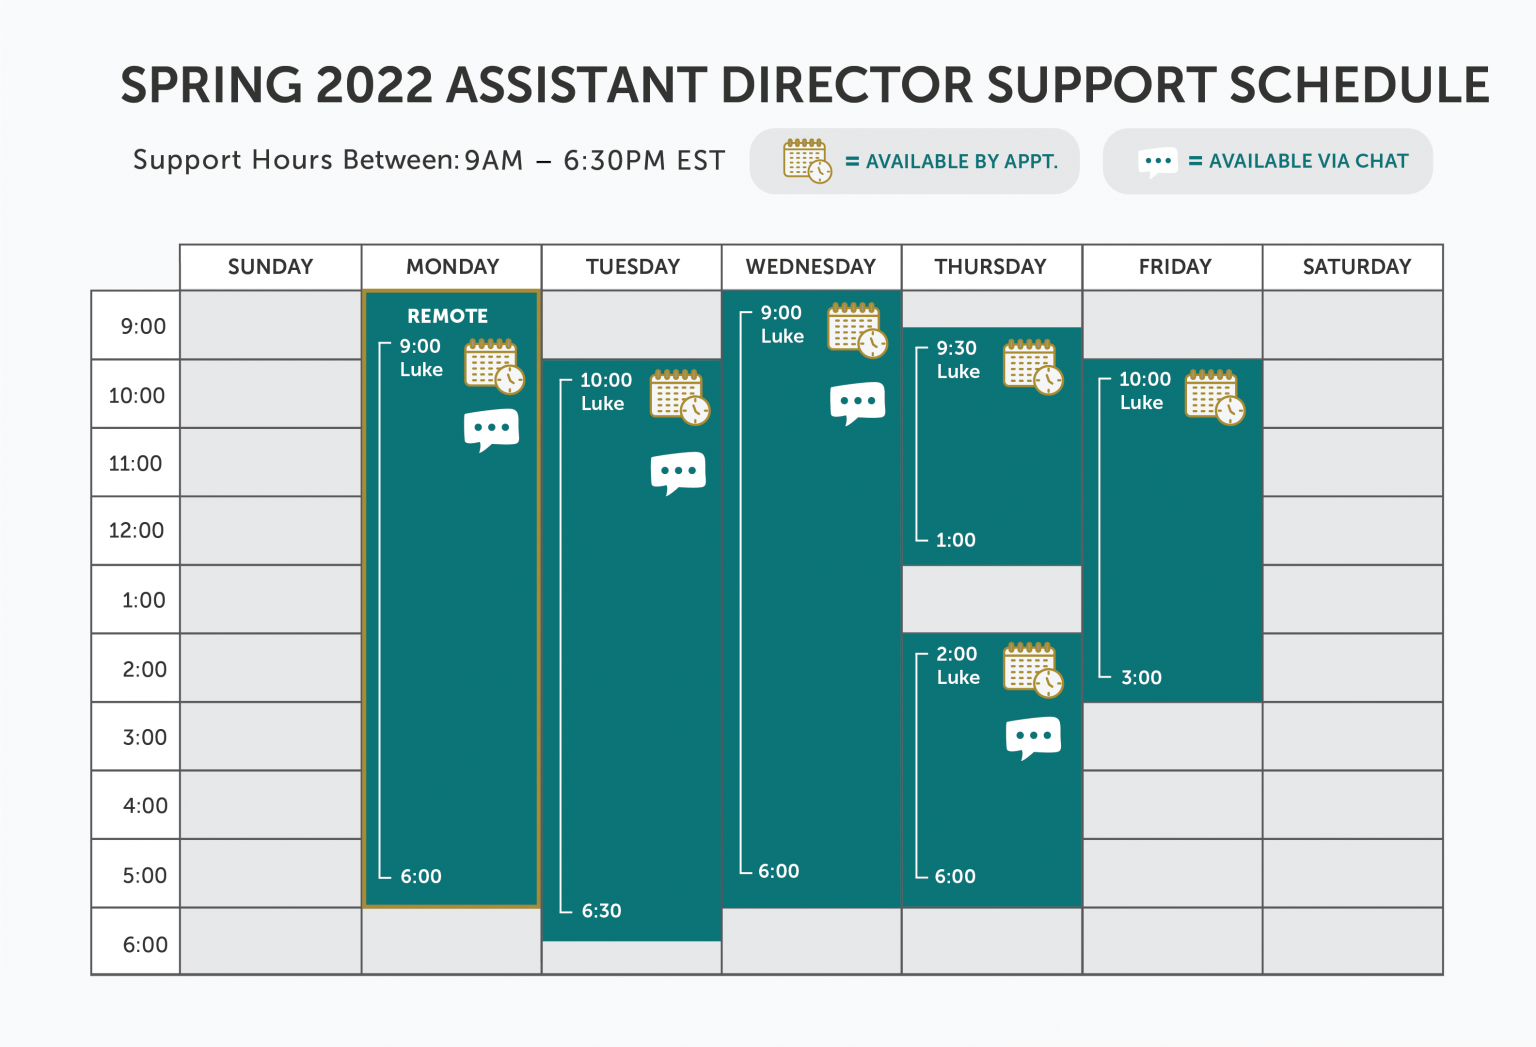 Spring 2022 schedule for the assistant director, support hours between 9am and 6:30pm EST